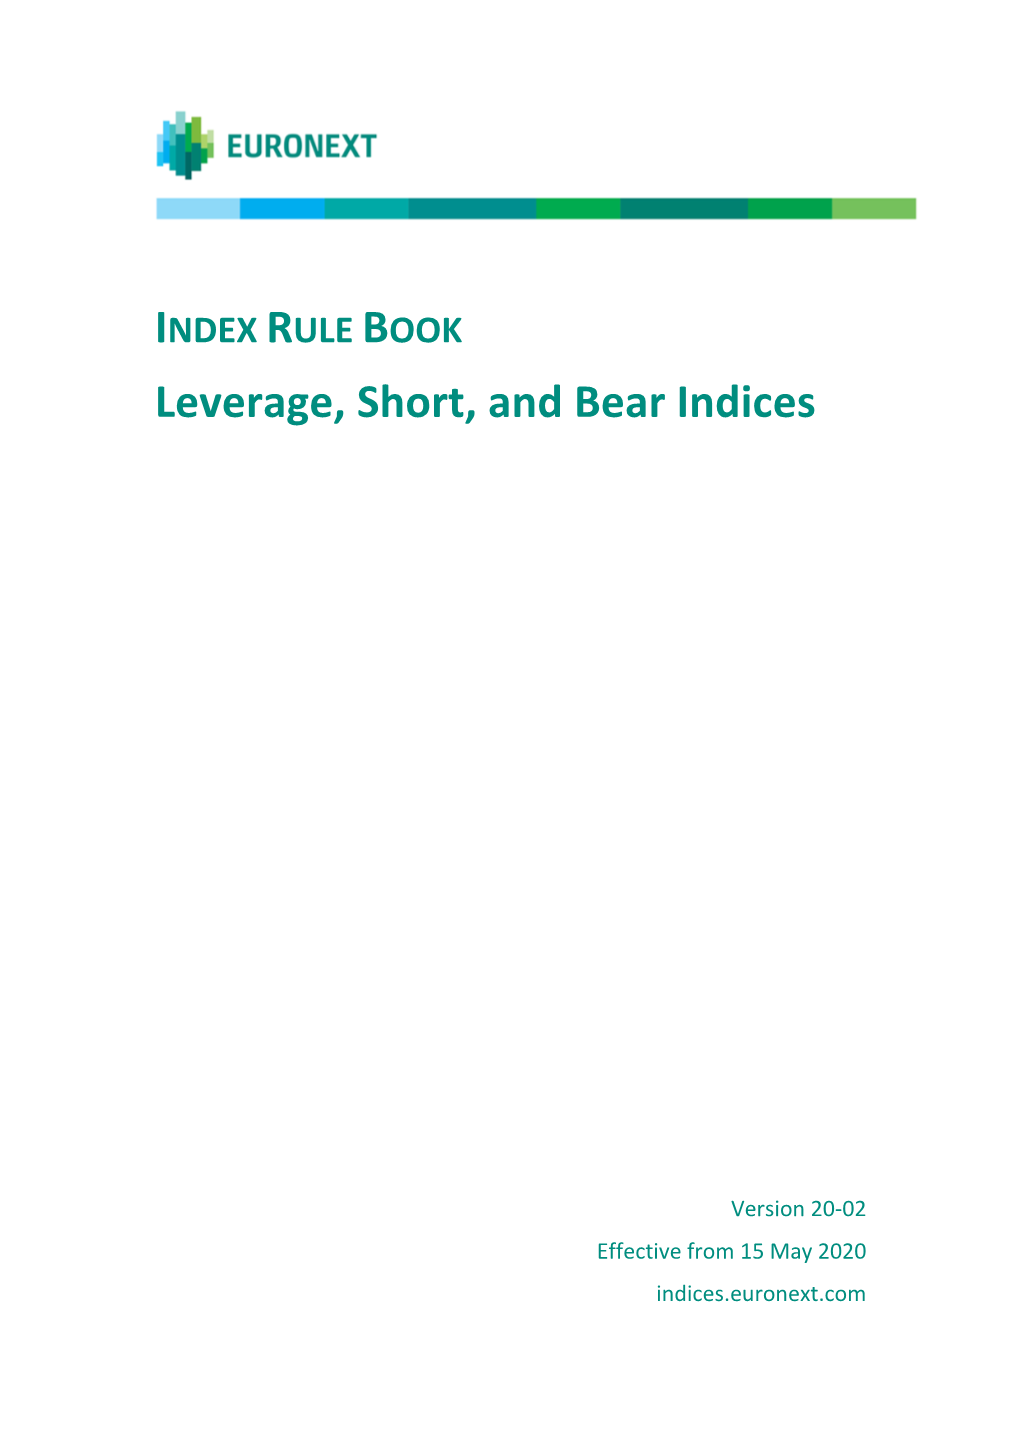 INDEX RULE BOOK Leverage, Short, and Bear Indices